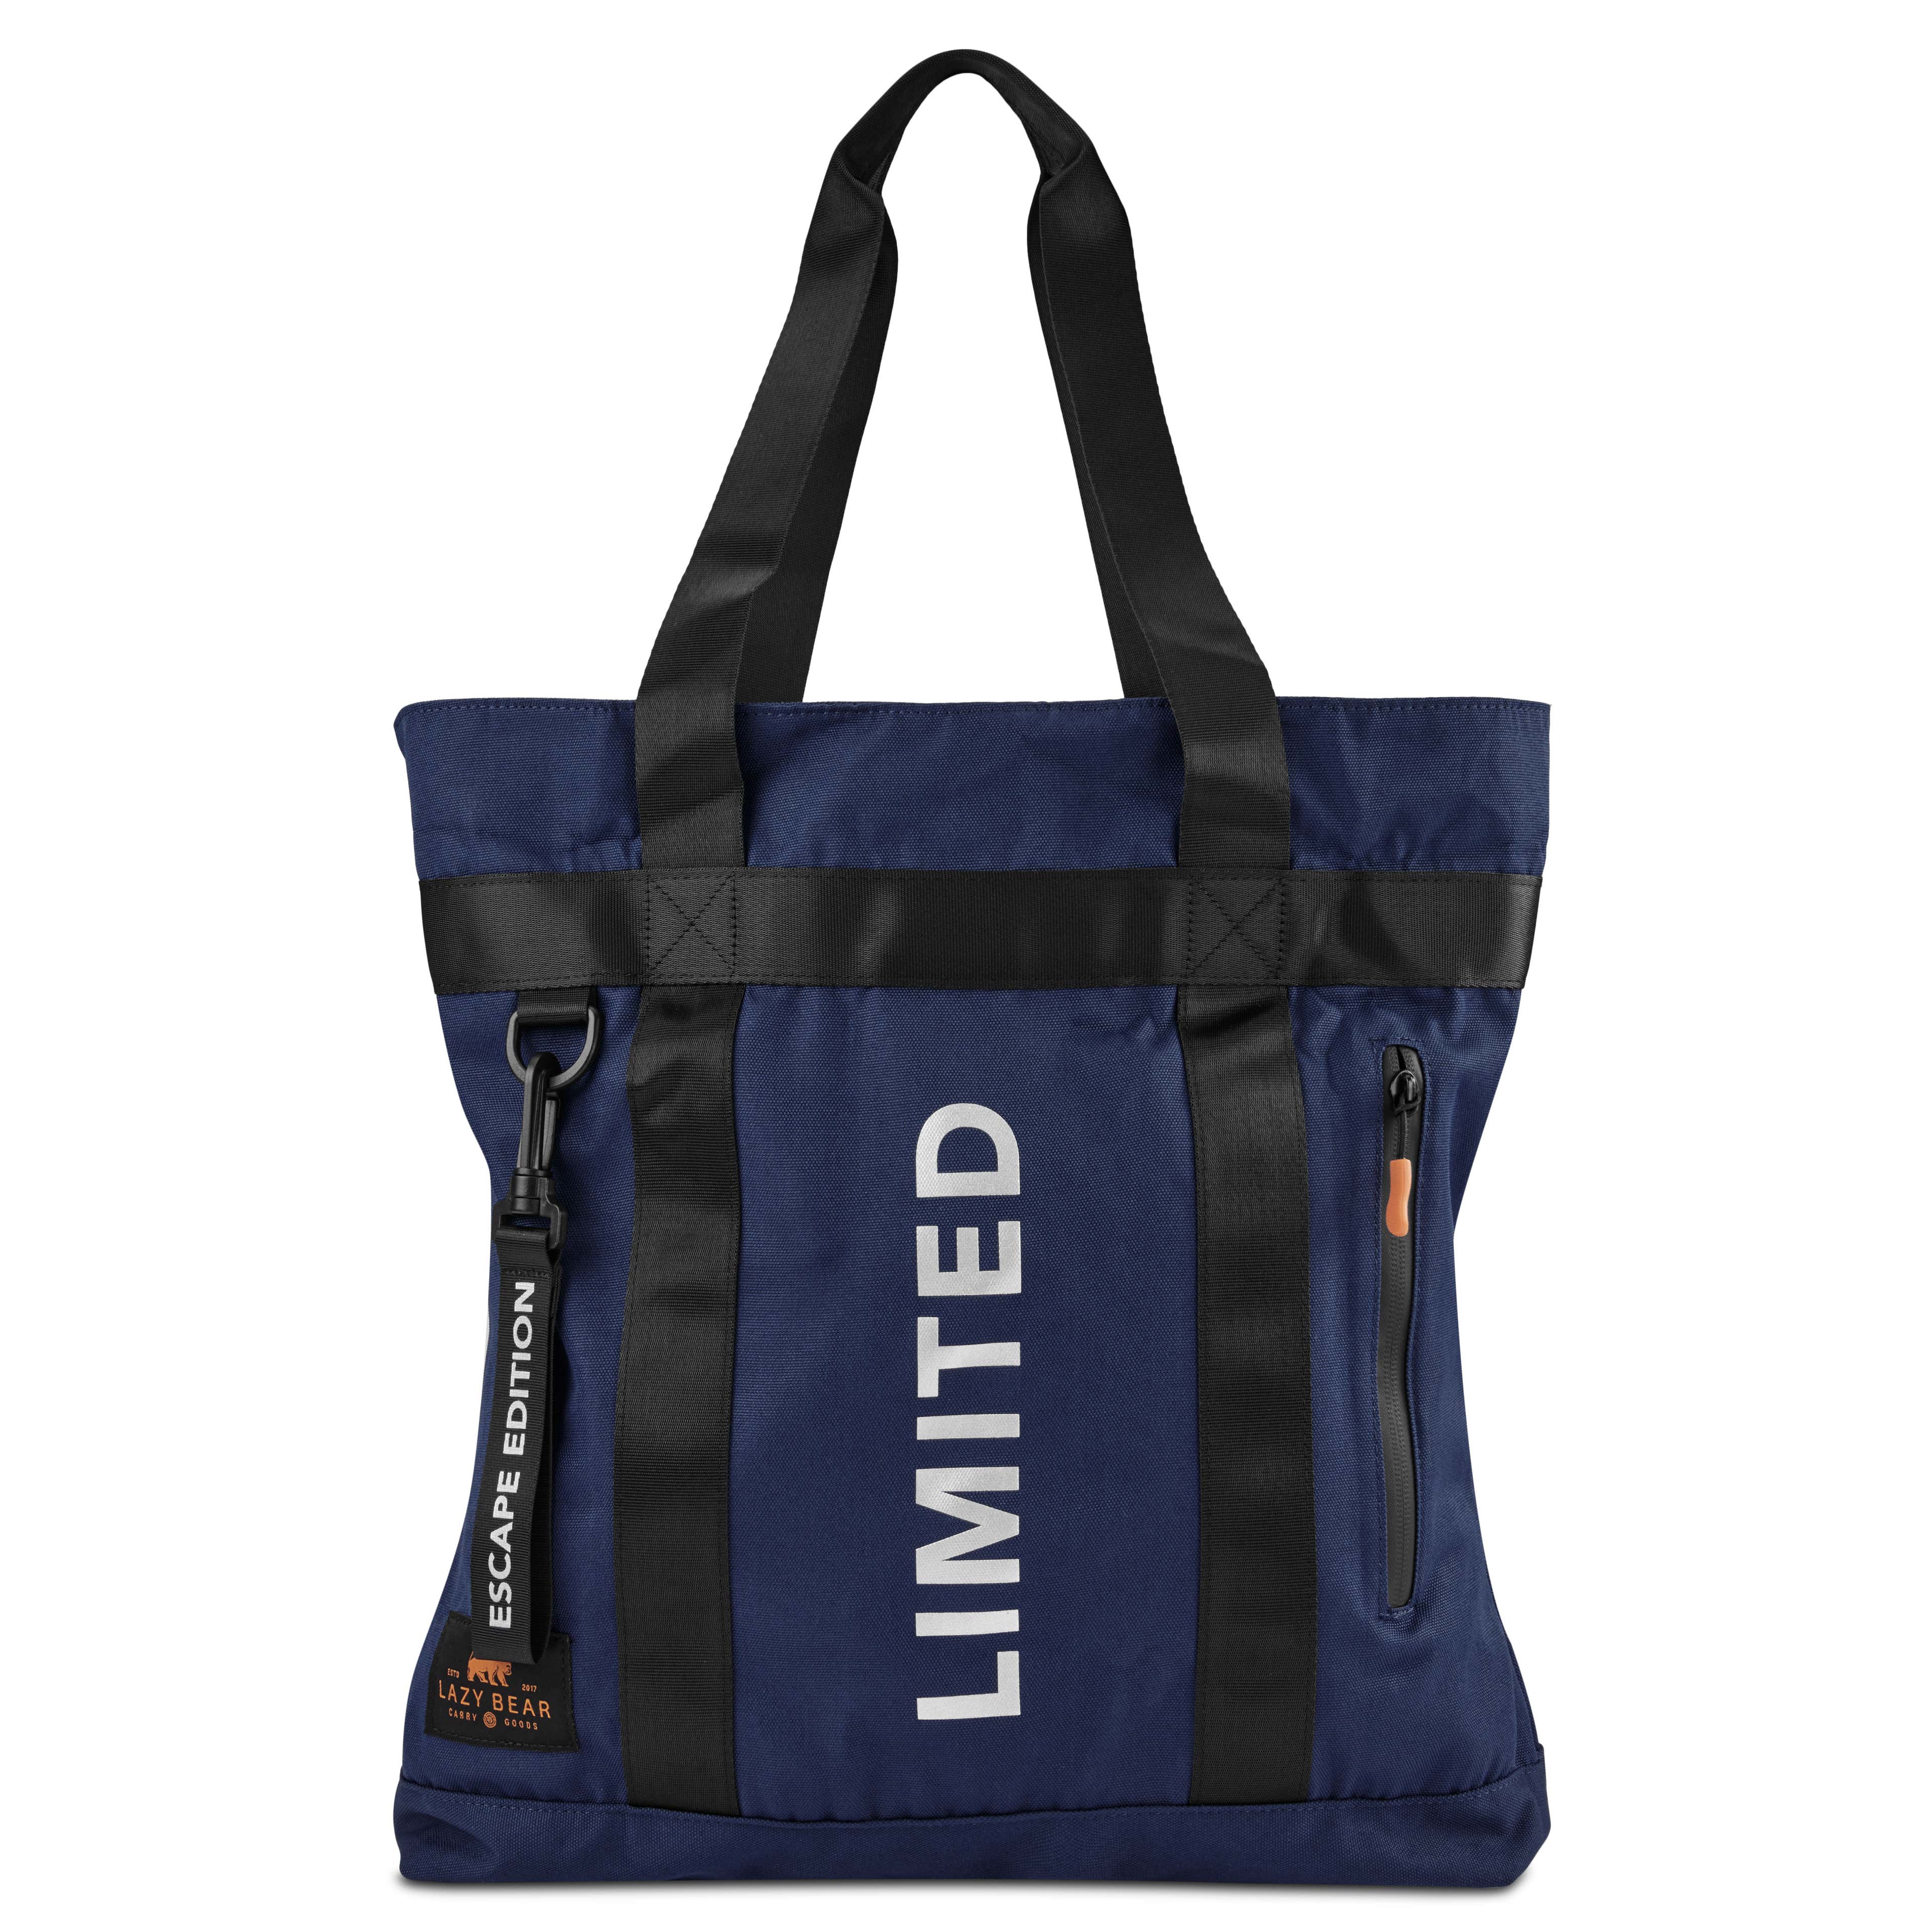 Lamair Blue Limited Edition Foldable Tote Bag